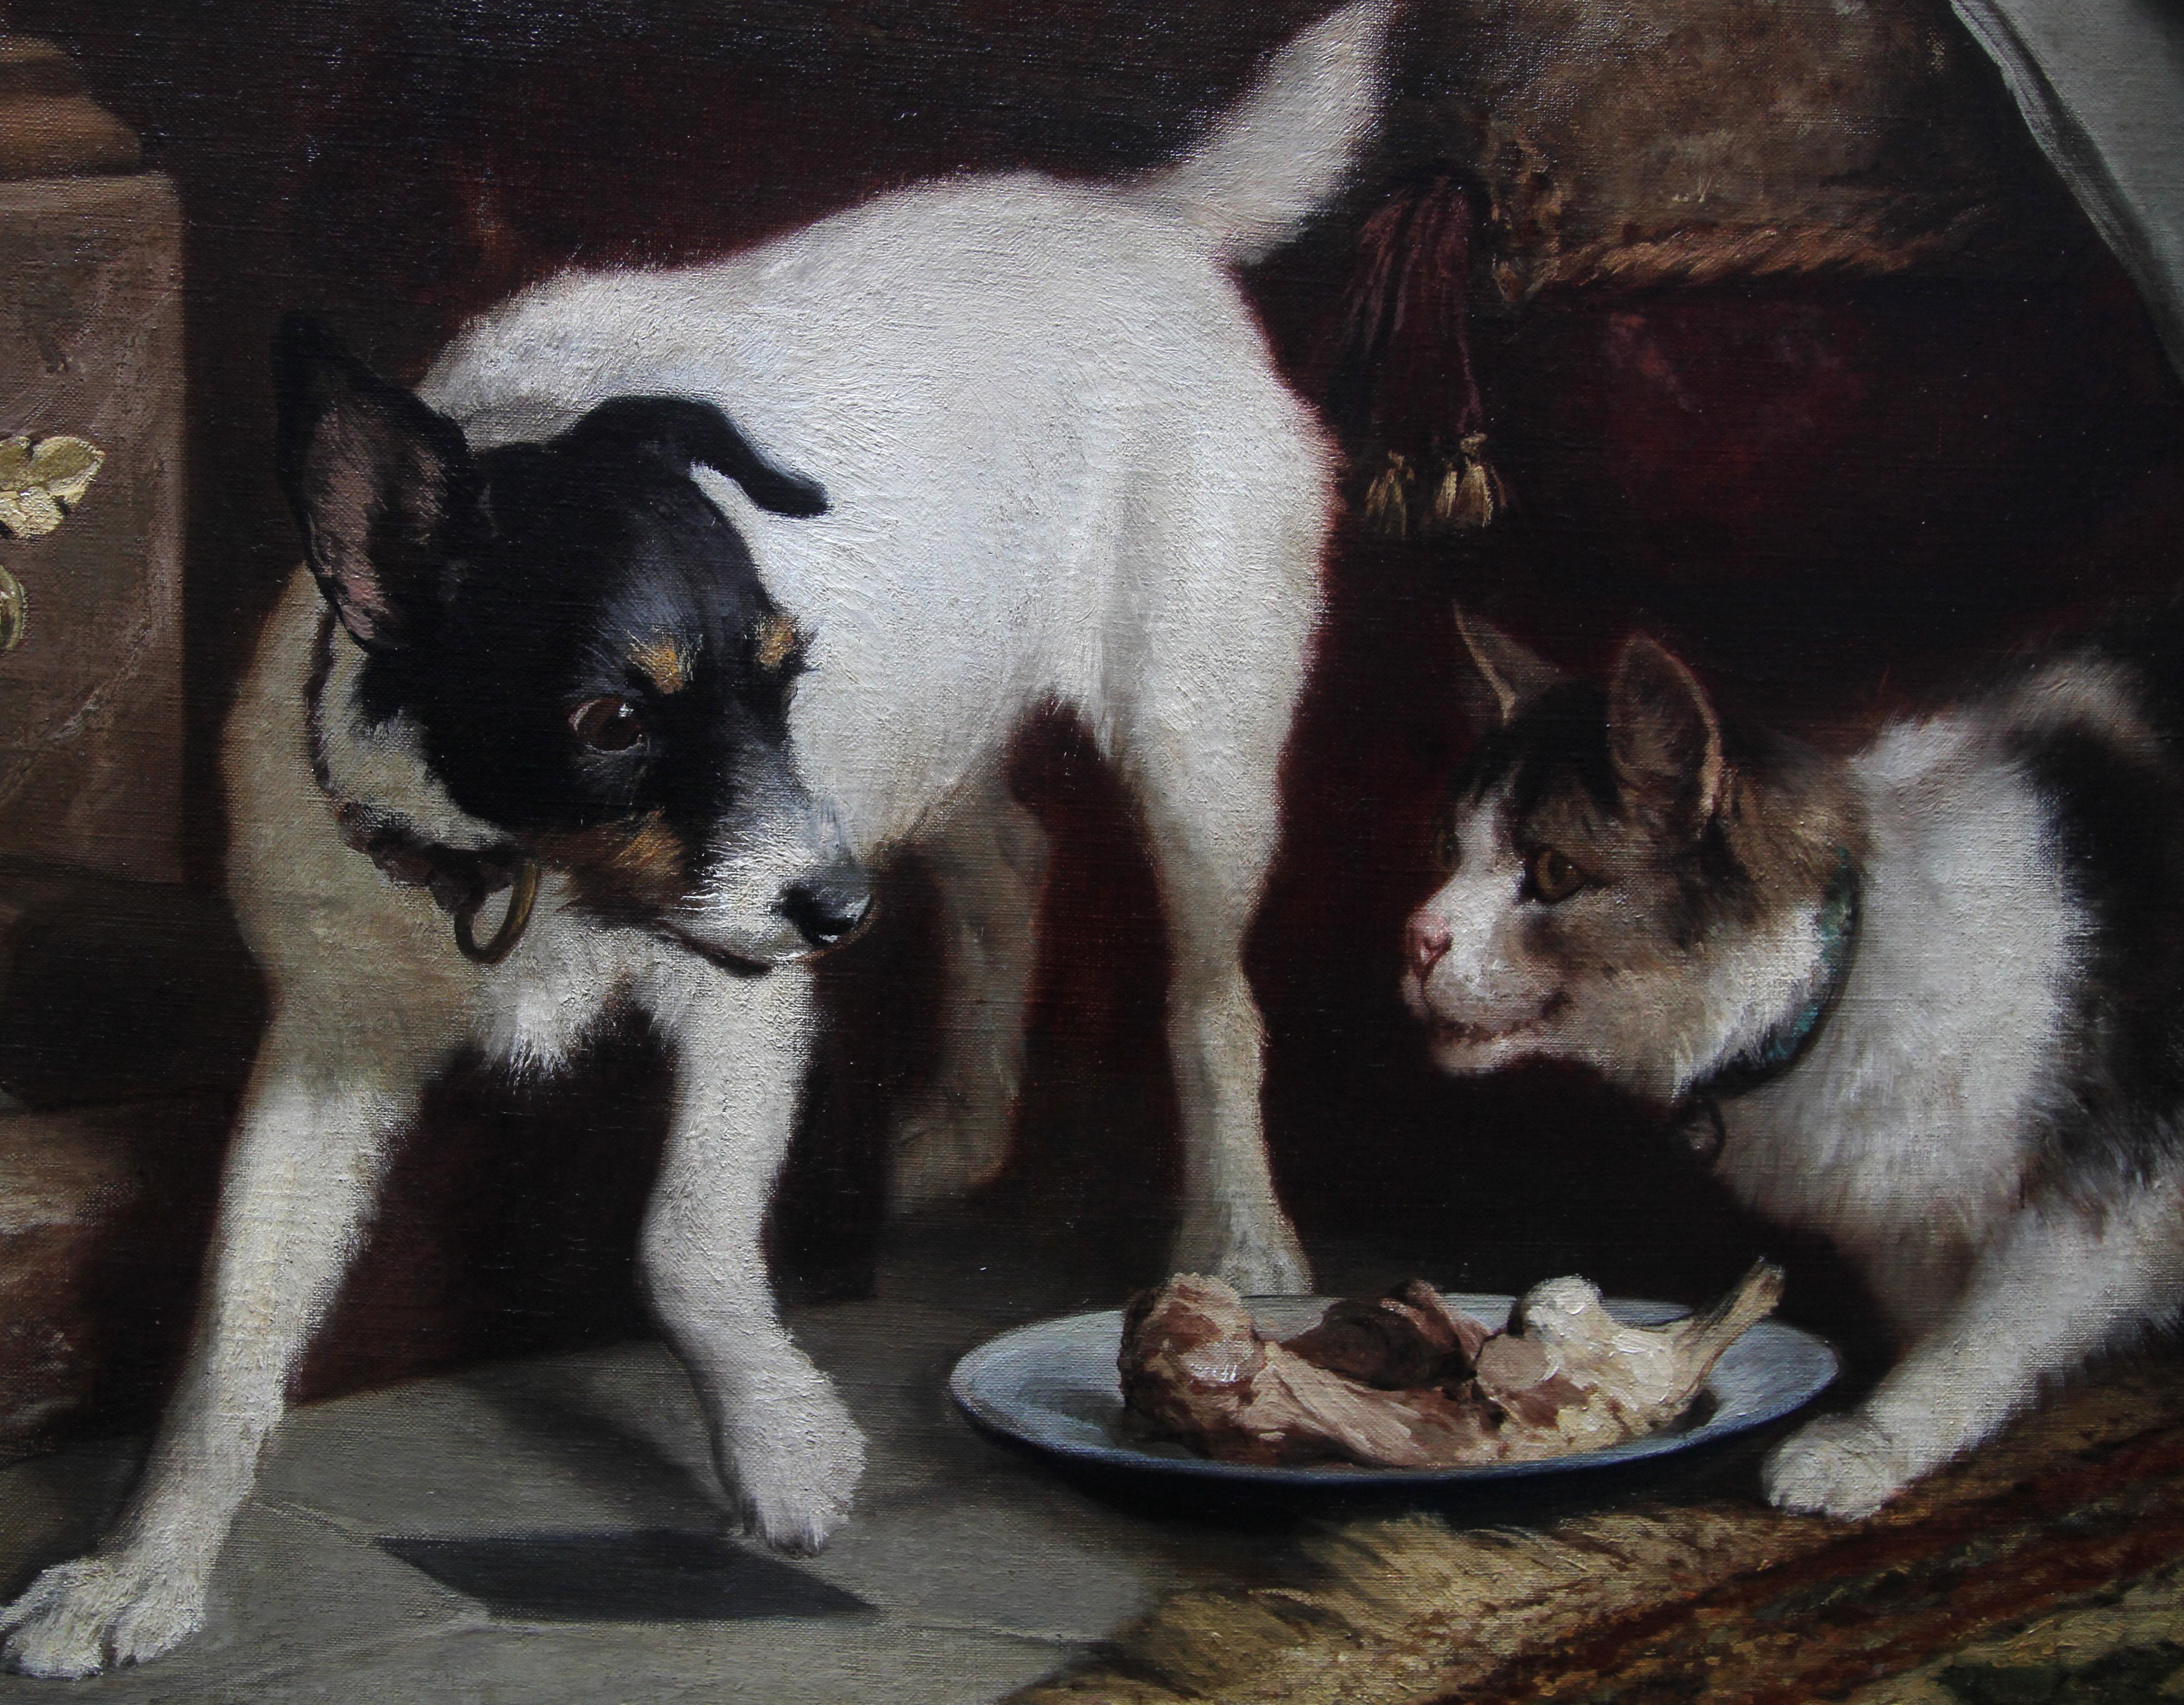 This superb Victorian animal portrait oil painting is by noted listed artist Carl Suhrlandt. Painted in 1884 it is a lovely portrait of a cat and dog in a living room at supper time. The detail of the interior is all at animal eye level - the